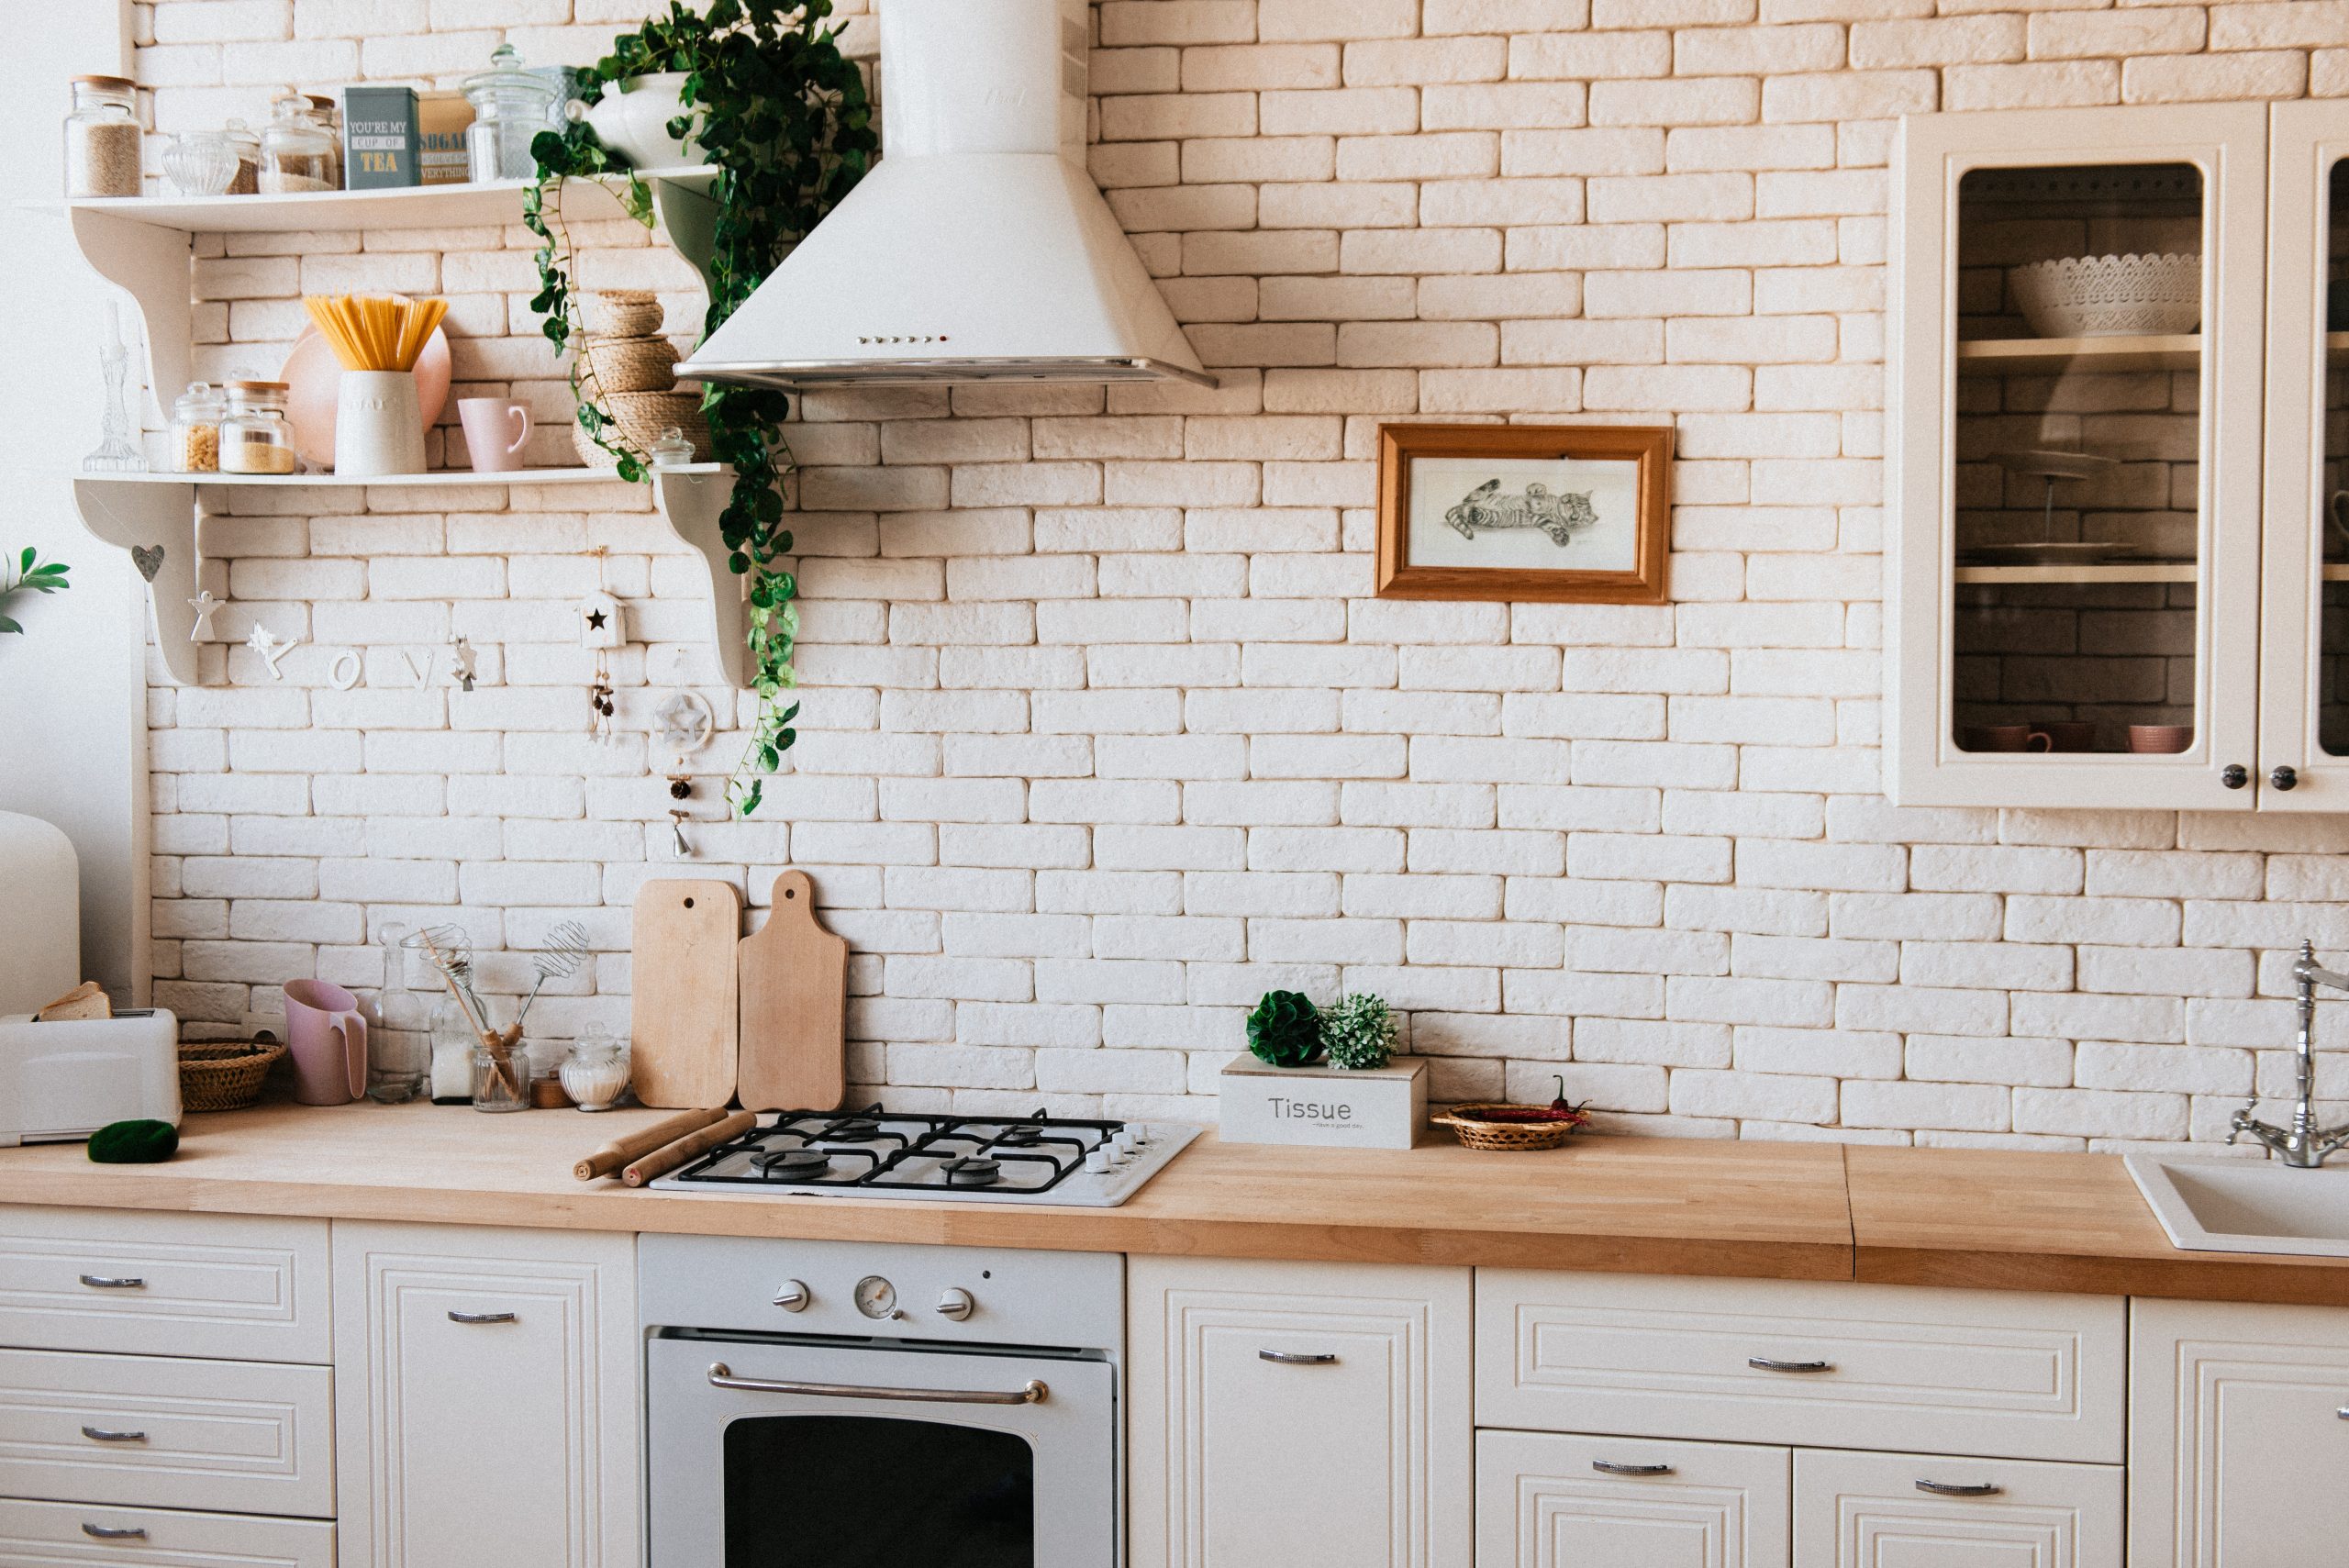 6 mistakes you make when decorating your kitchen